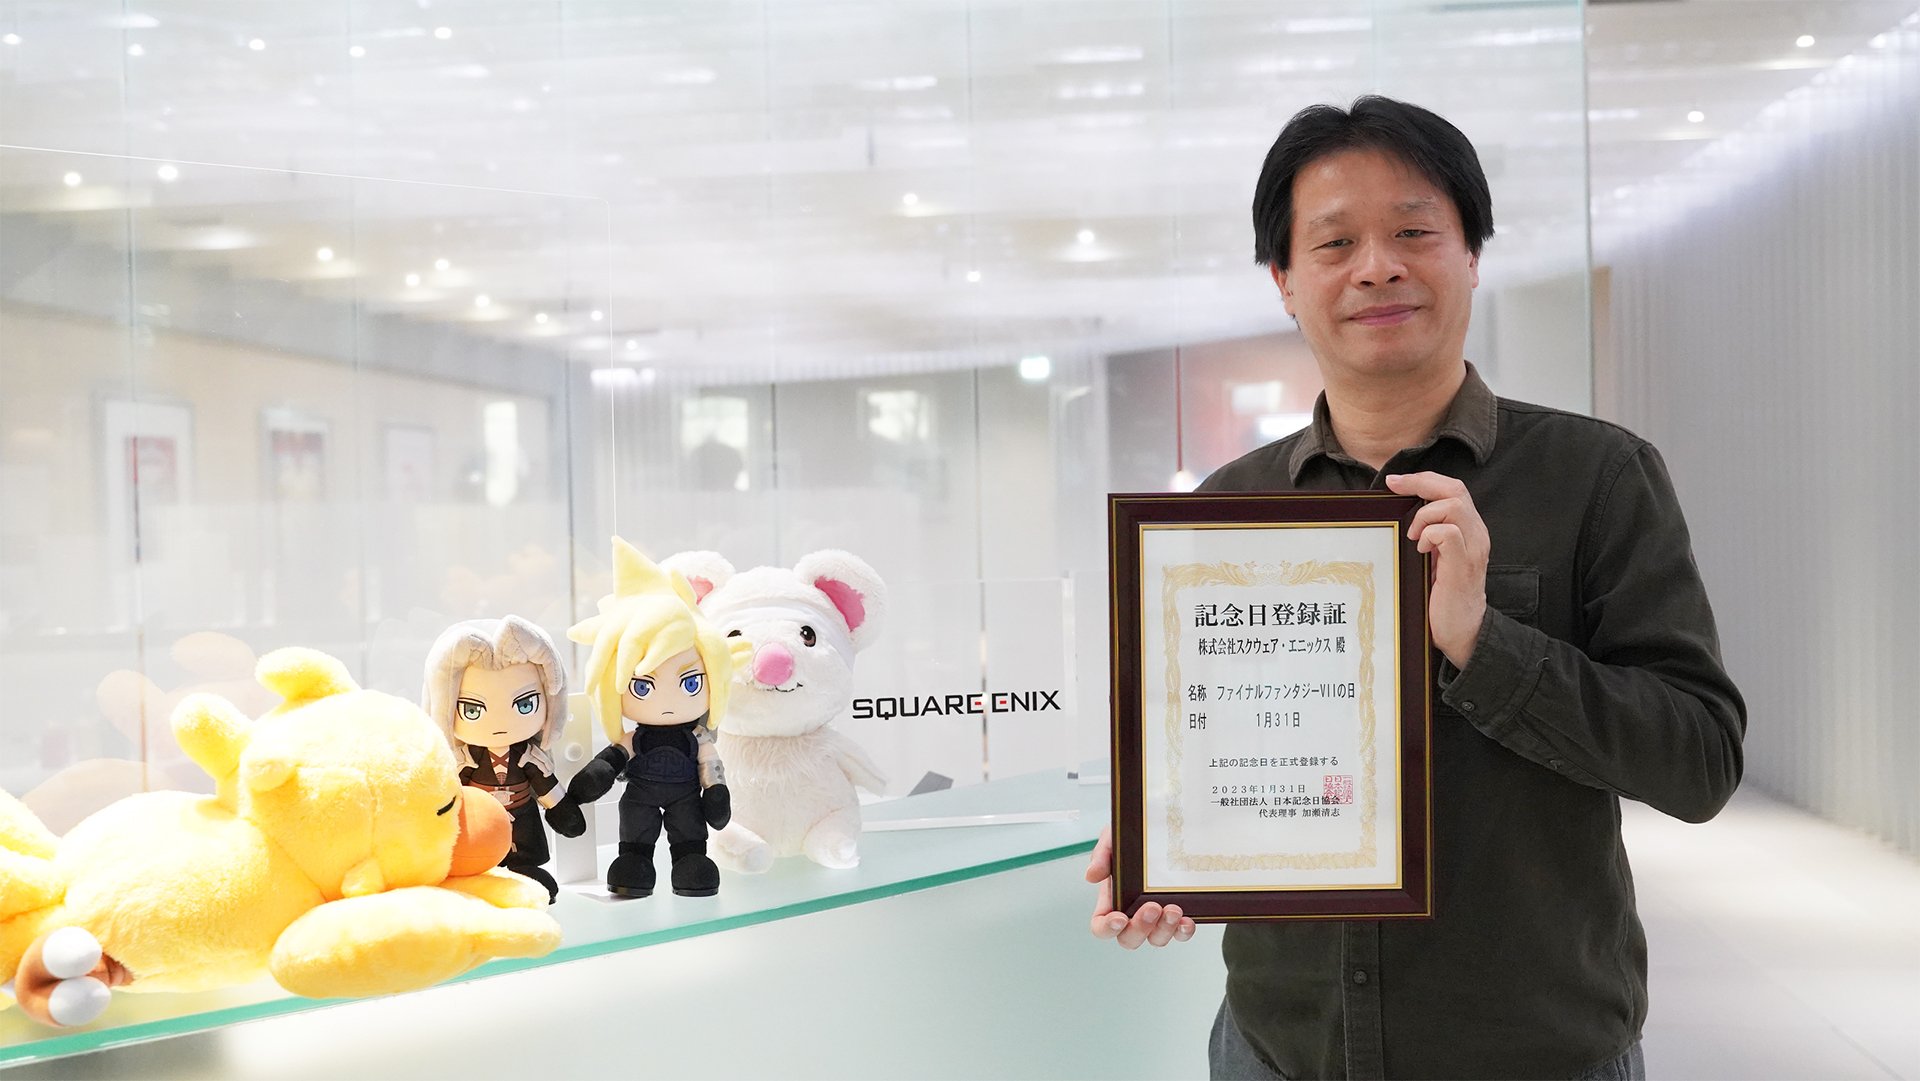 Final Fantasy VII Day is officially registered with the Japan Anniversary Association